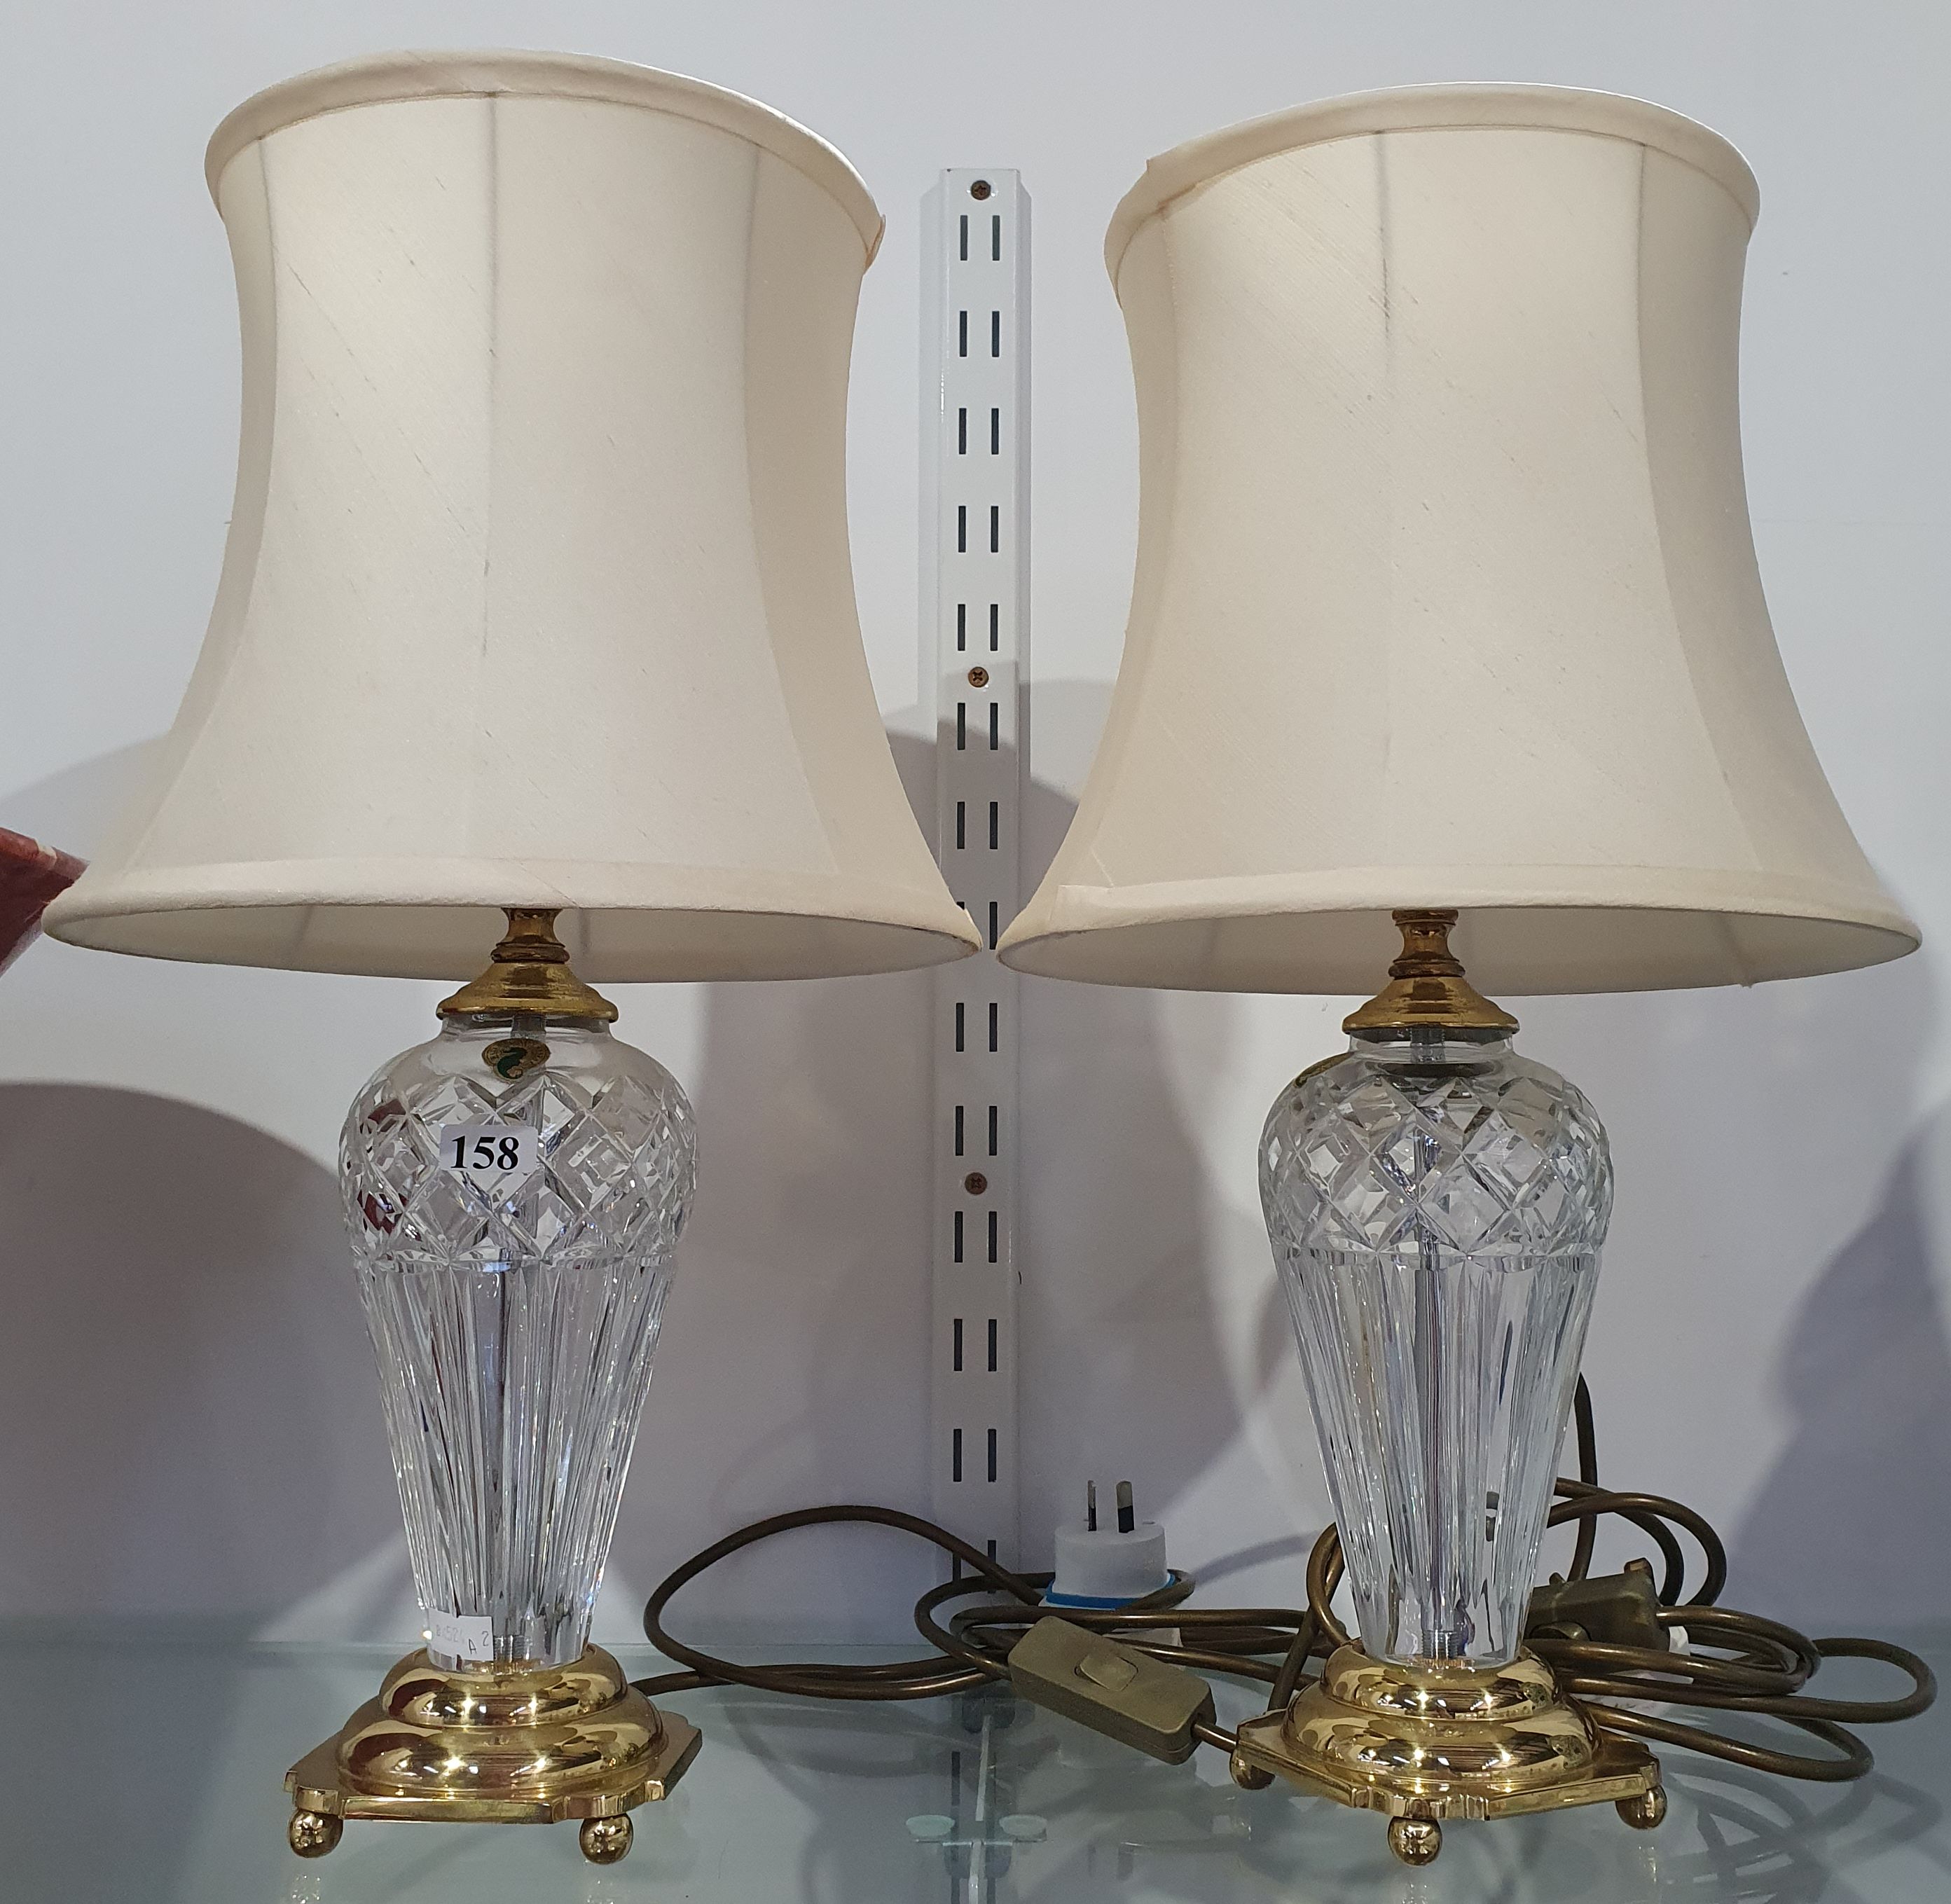 A Pair Of Waterford Crystal Table Lamps, Waterford Crystal Table Lamps Auction